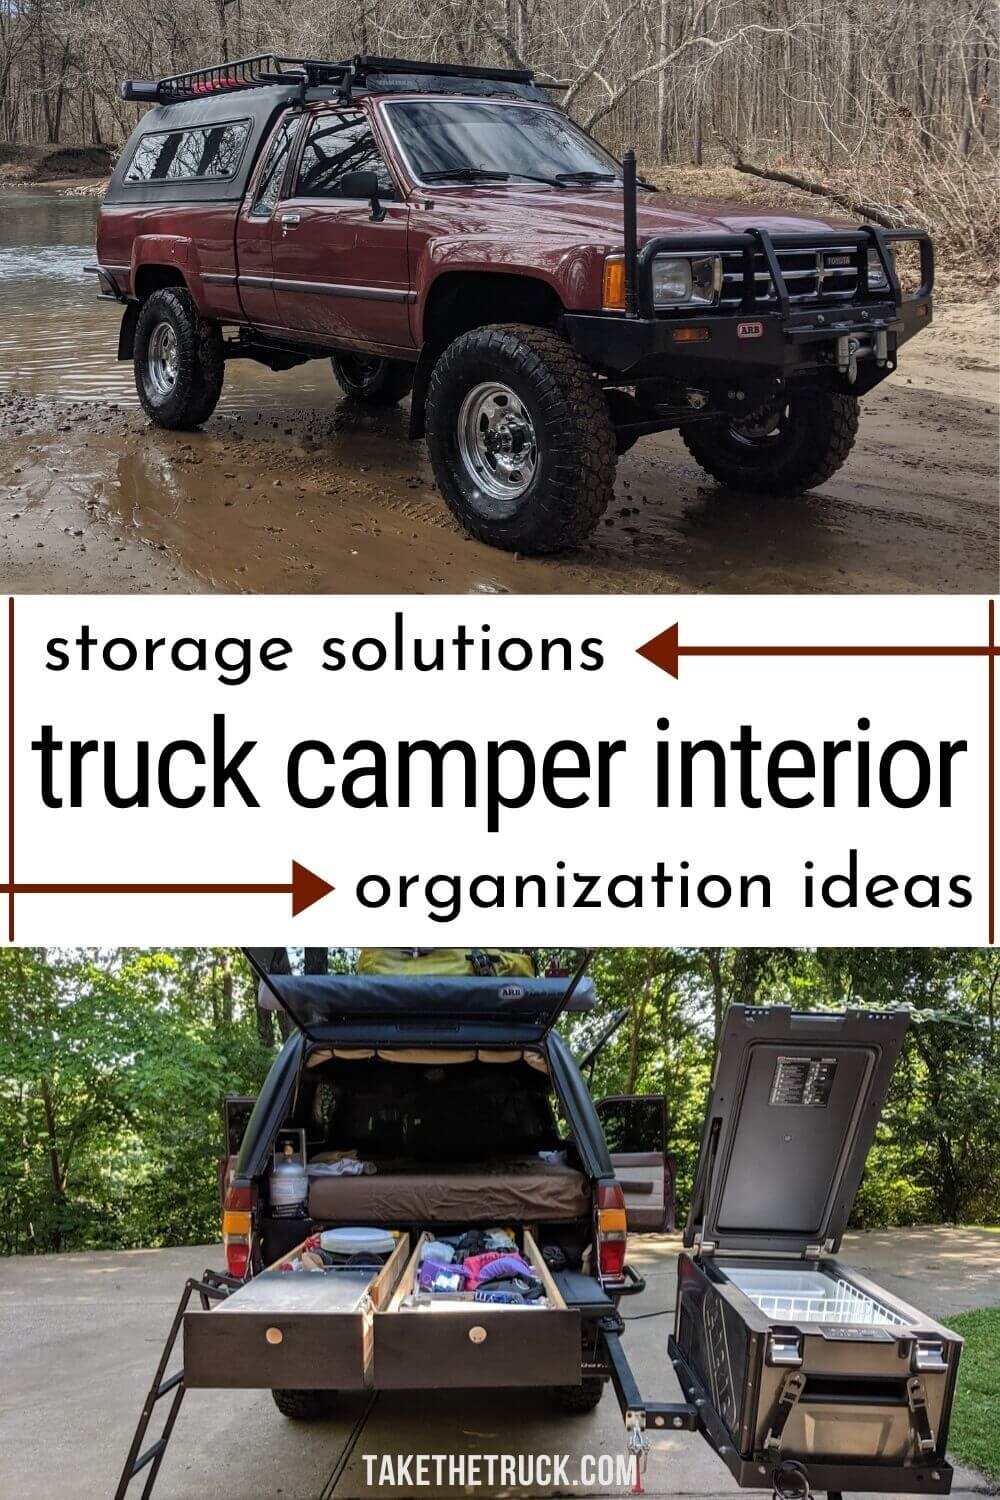 Staying organized in a tiny truck camper isn’t easy! Check out this post for truck camper inside storage and organization ideas and tips - lots of photos too! 